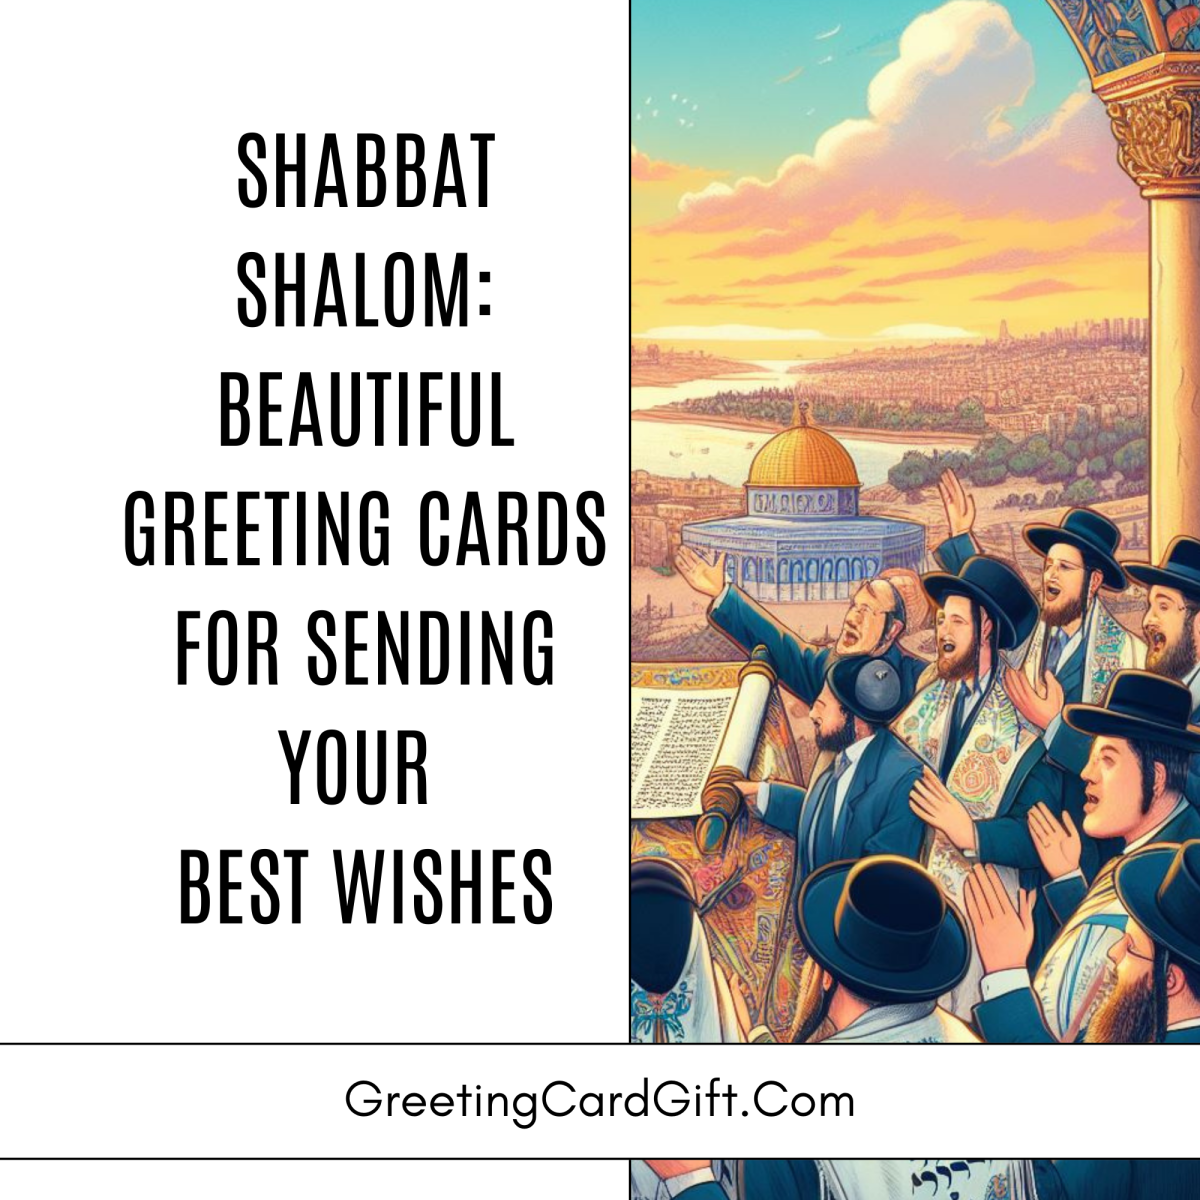 Shabbat Shalom: Beautiful Greeting Cards For Sending Your Best Wishes